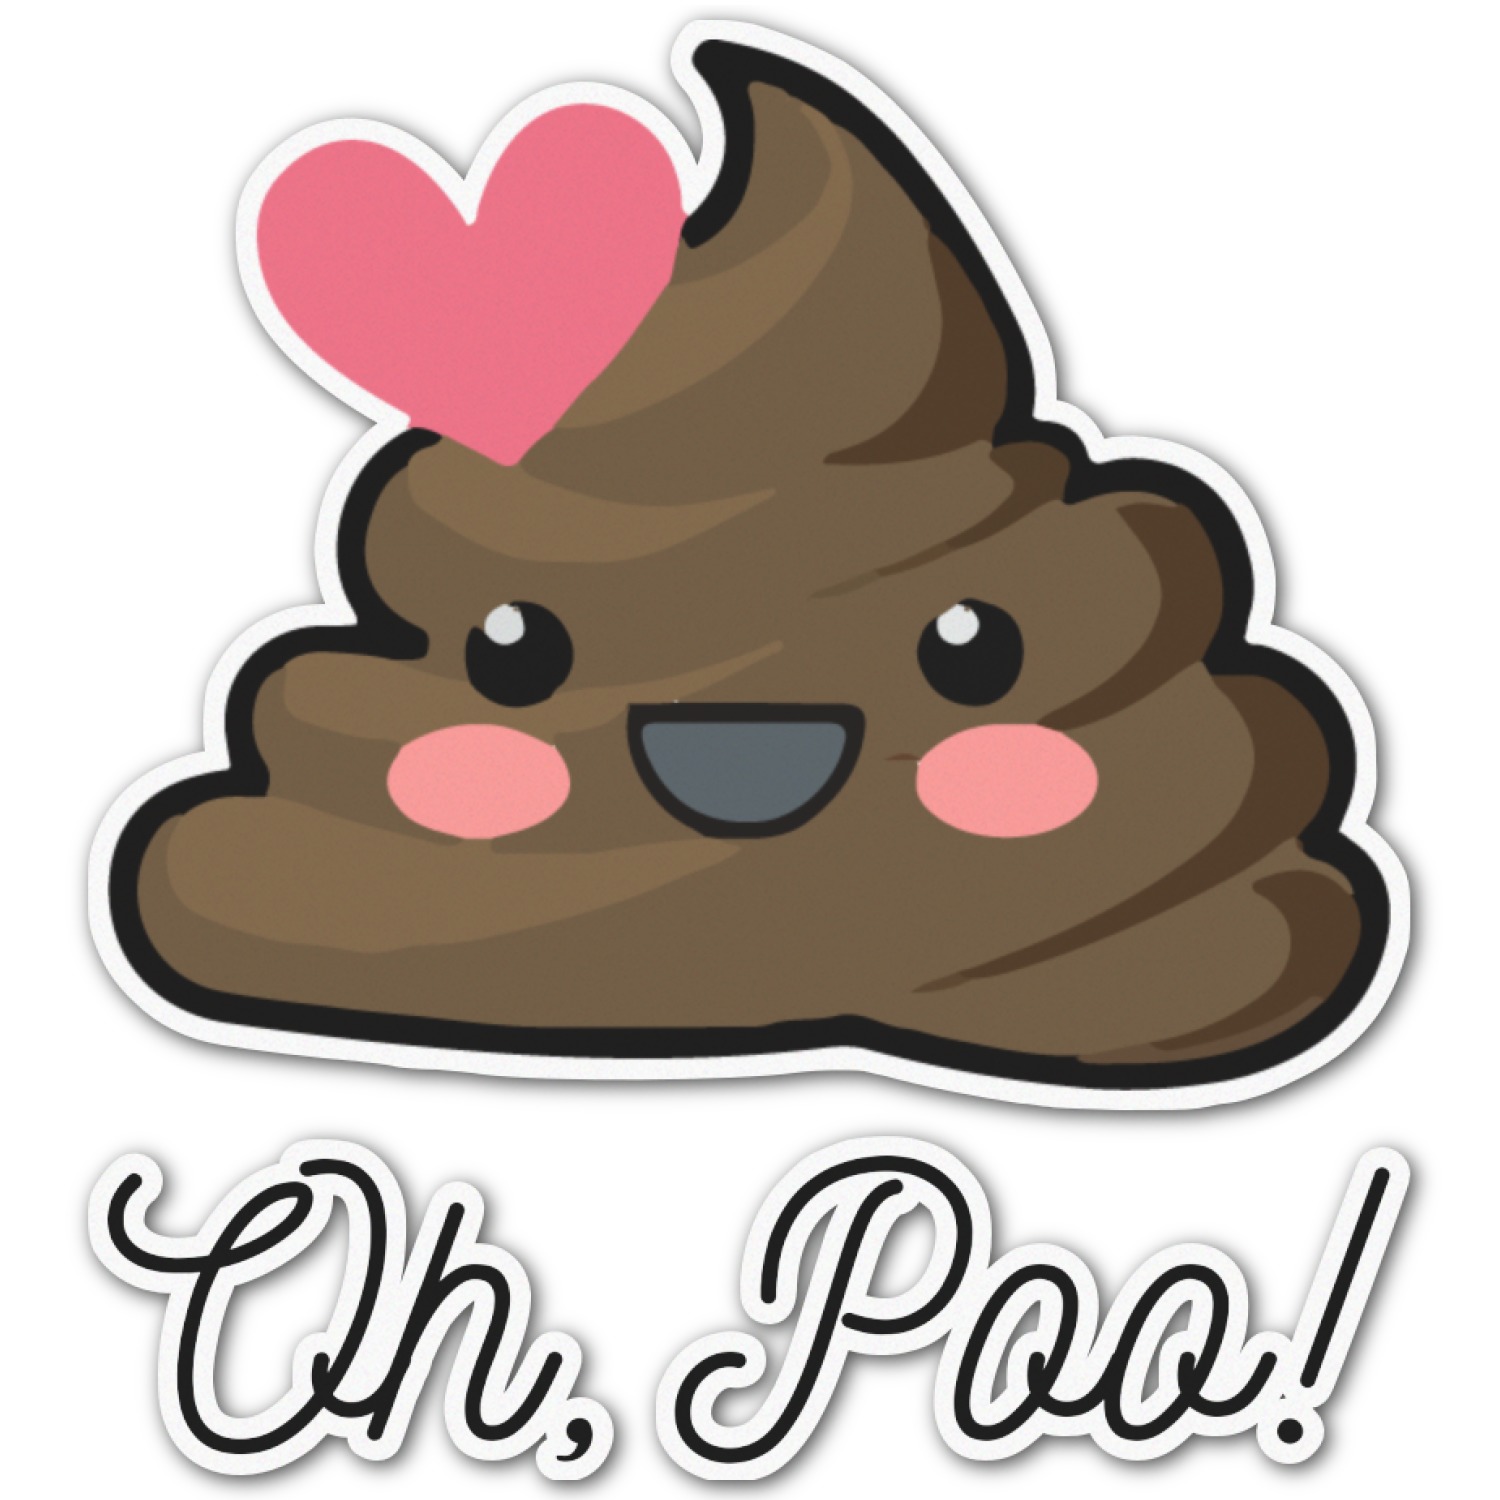 poop-emoji-with-wings-clipart-5466104-pinclipart-images-and-photos-finder